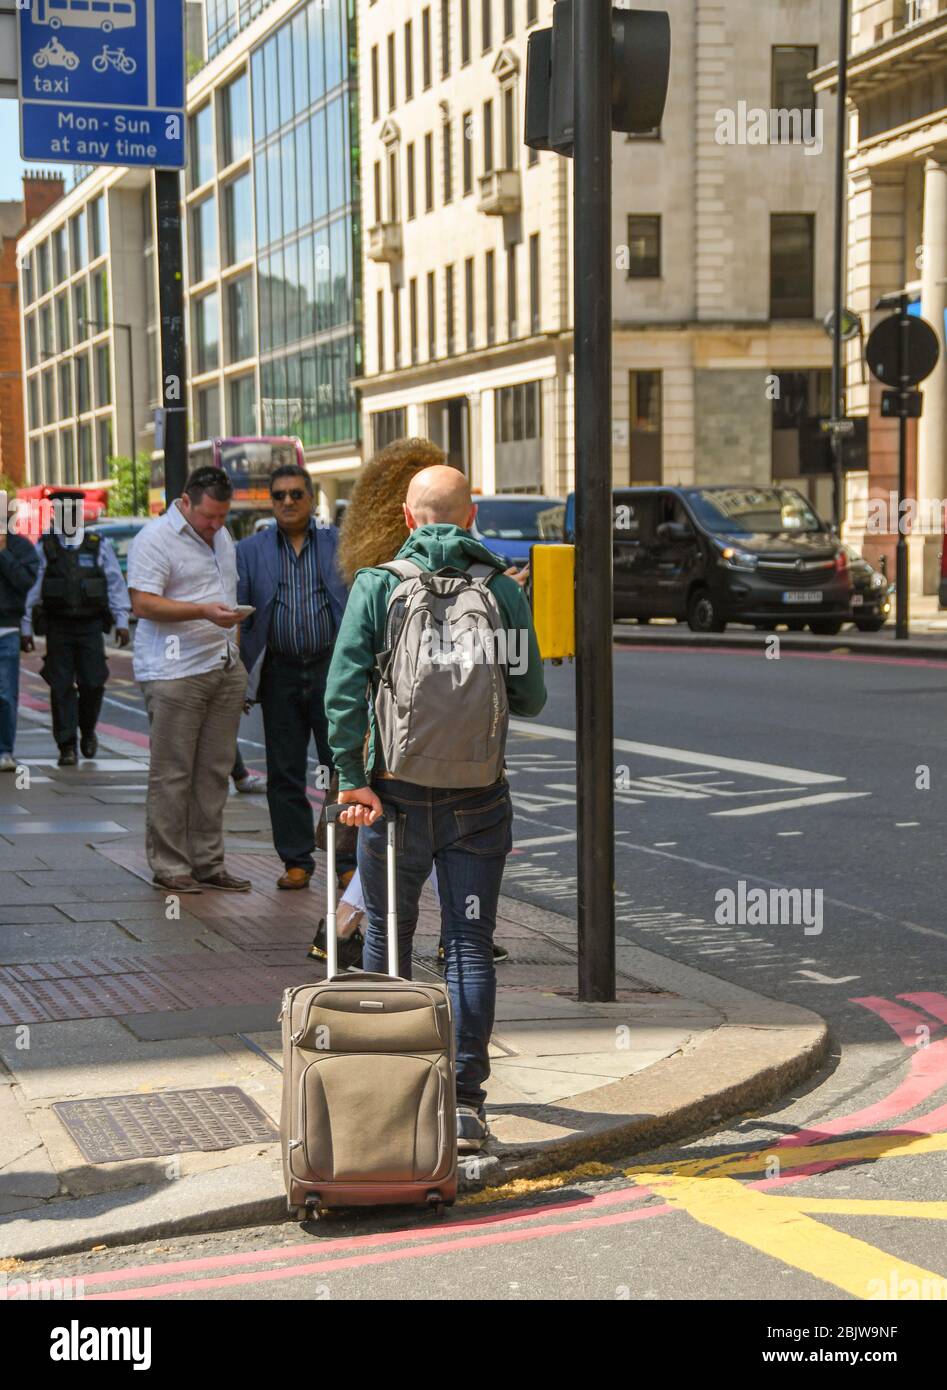 LONDON, ENGLAND - JULY 2018: Person walking down a street in central London pulling a suitcase Stock Photo